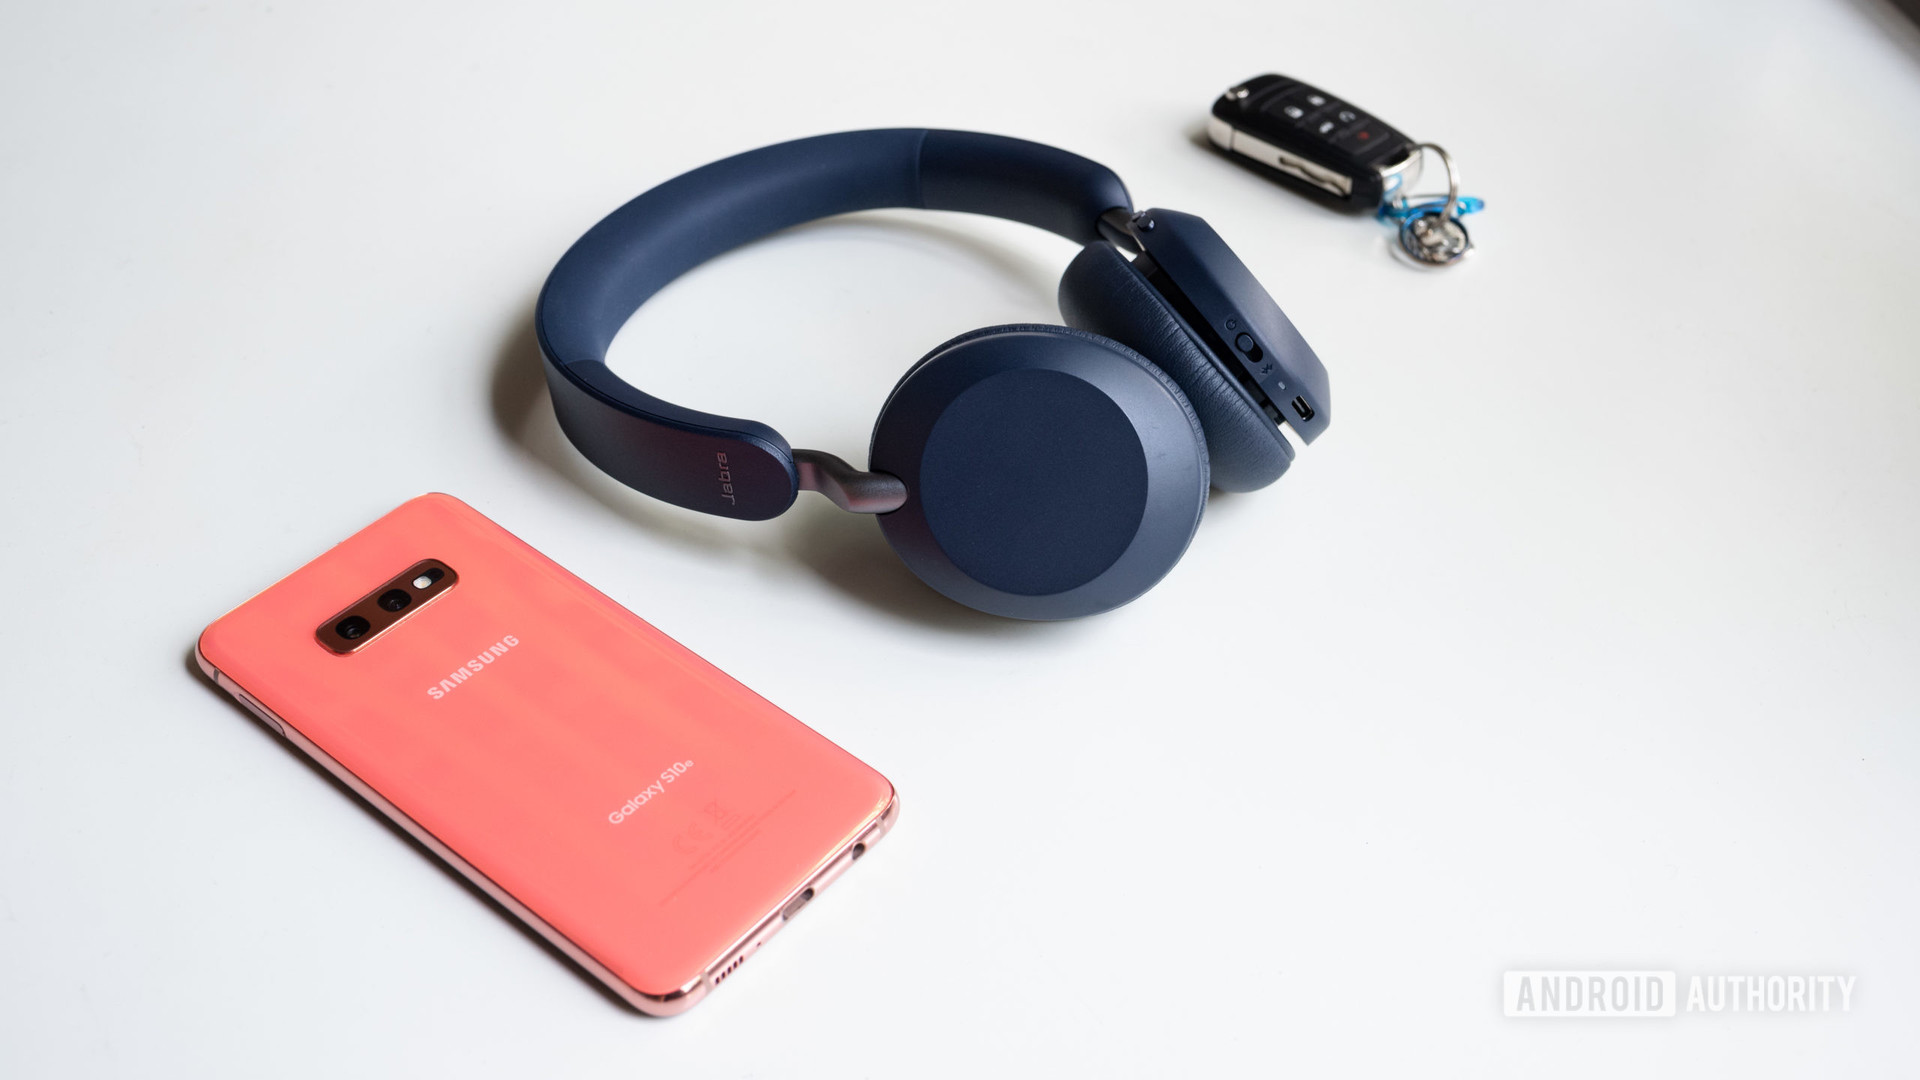 The Jabra Elite 45h on-ear headphones in navy next to a Samsung Galaxy S10e smartphone.